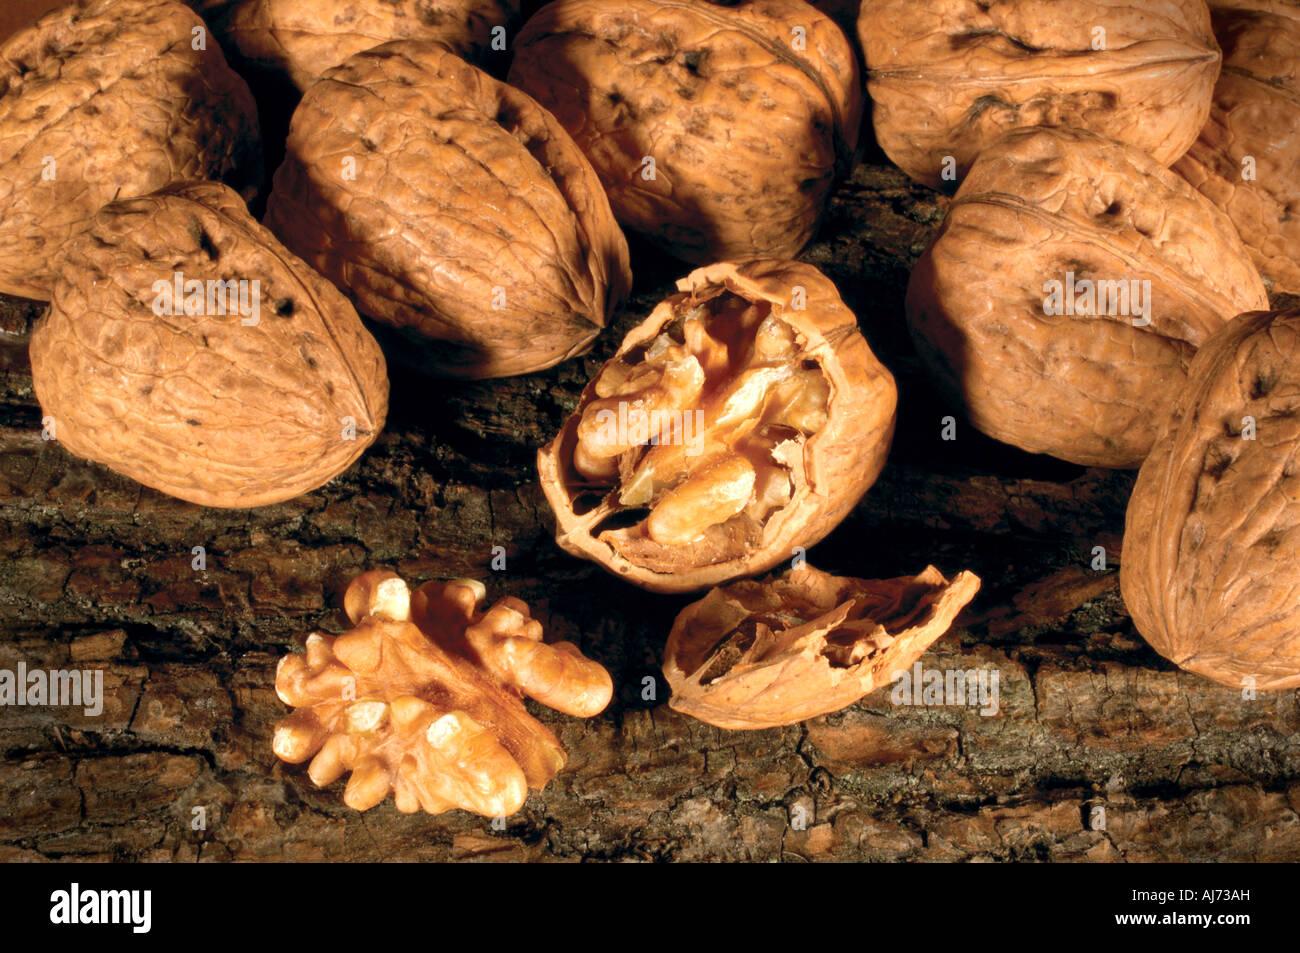 whole walnuts one cracked open with broken shell Stock Photo